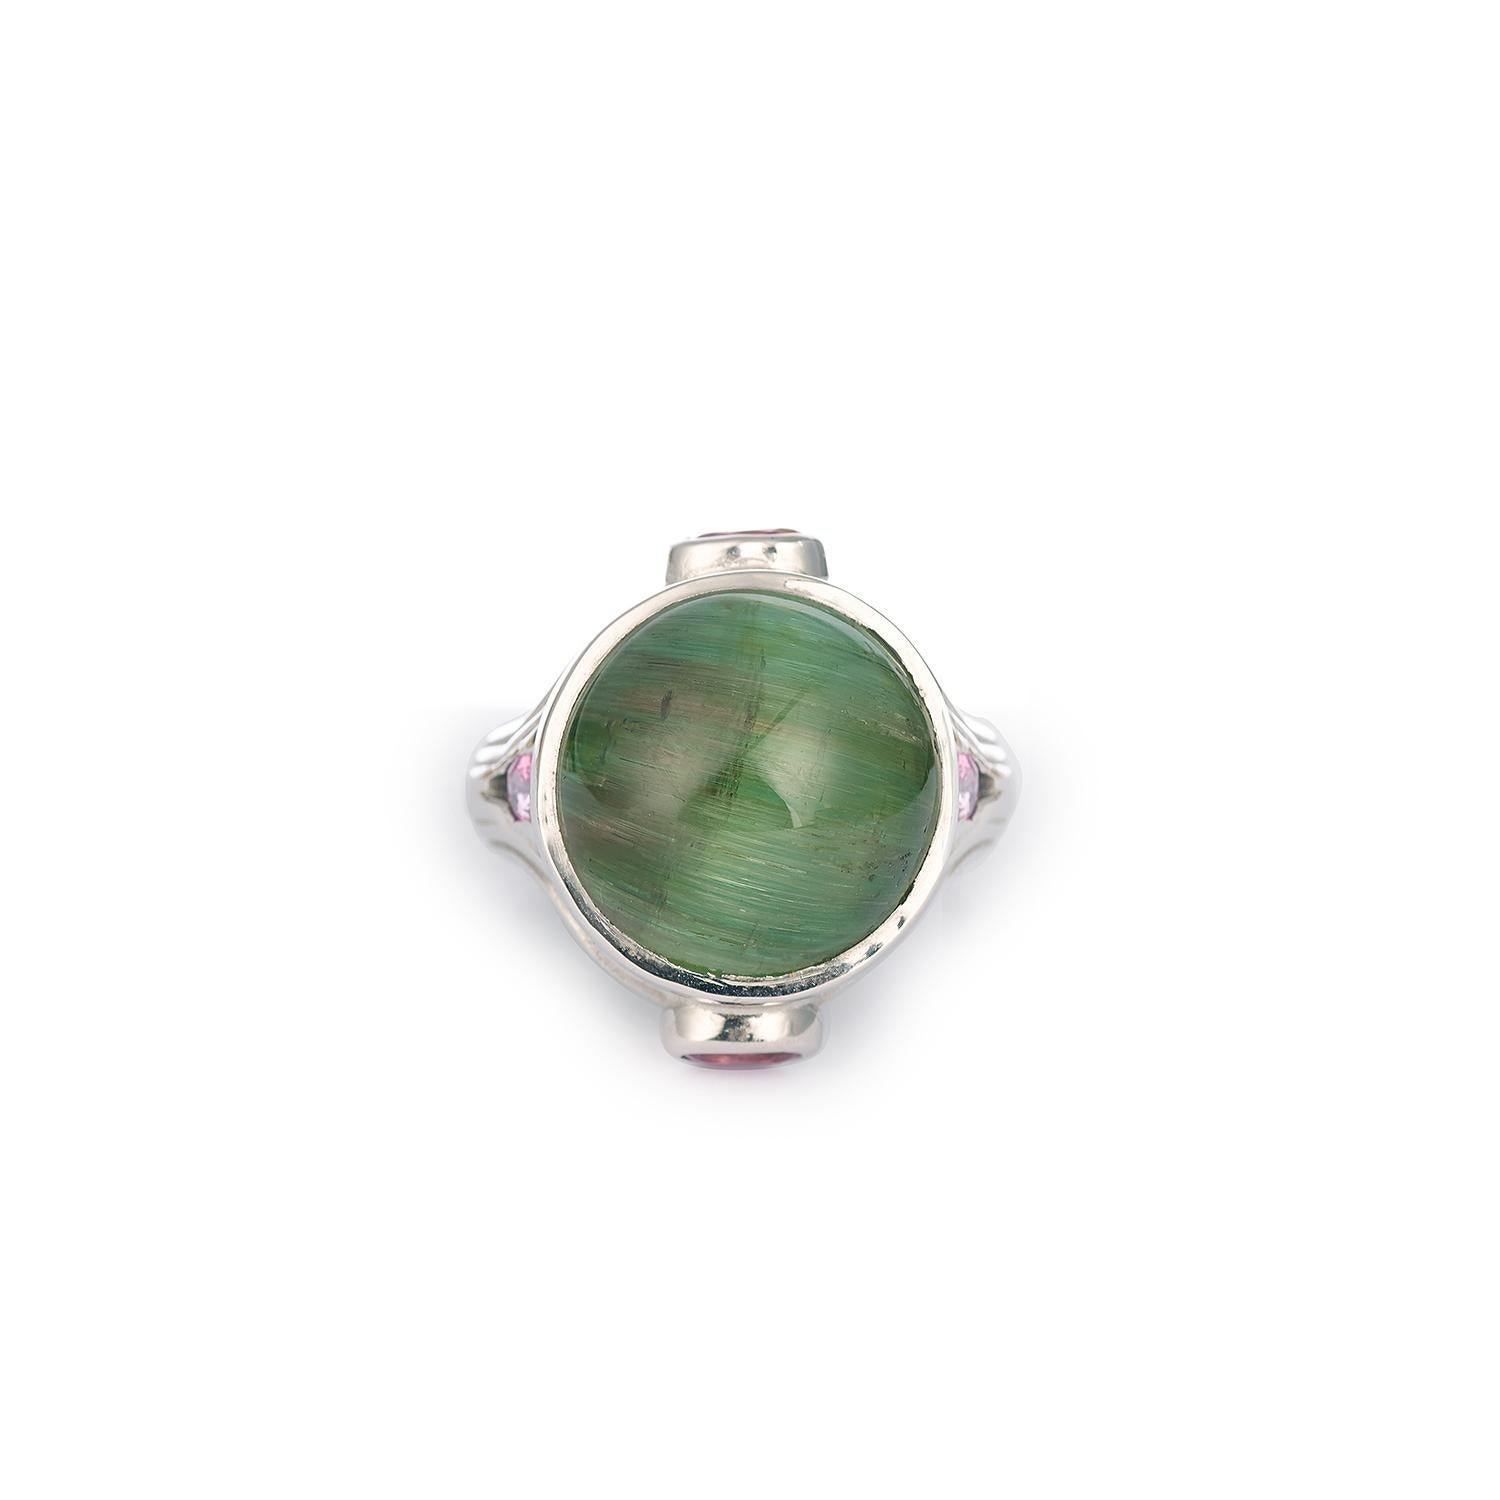 Original ring presenting in its middle a “cat’s eye” cabochon green Tourmaline.
The sides set with pink sapphires.

18K white gold, 750 / 1000th

Green tourmaline weight 18.37 carats

Pink sapphire weight: 1.20 carats

Size of the ring : 53 (FR) /